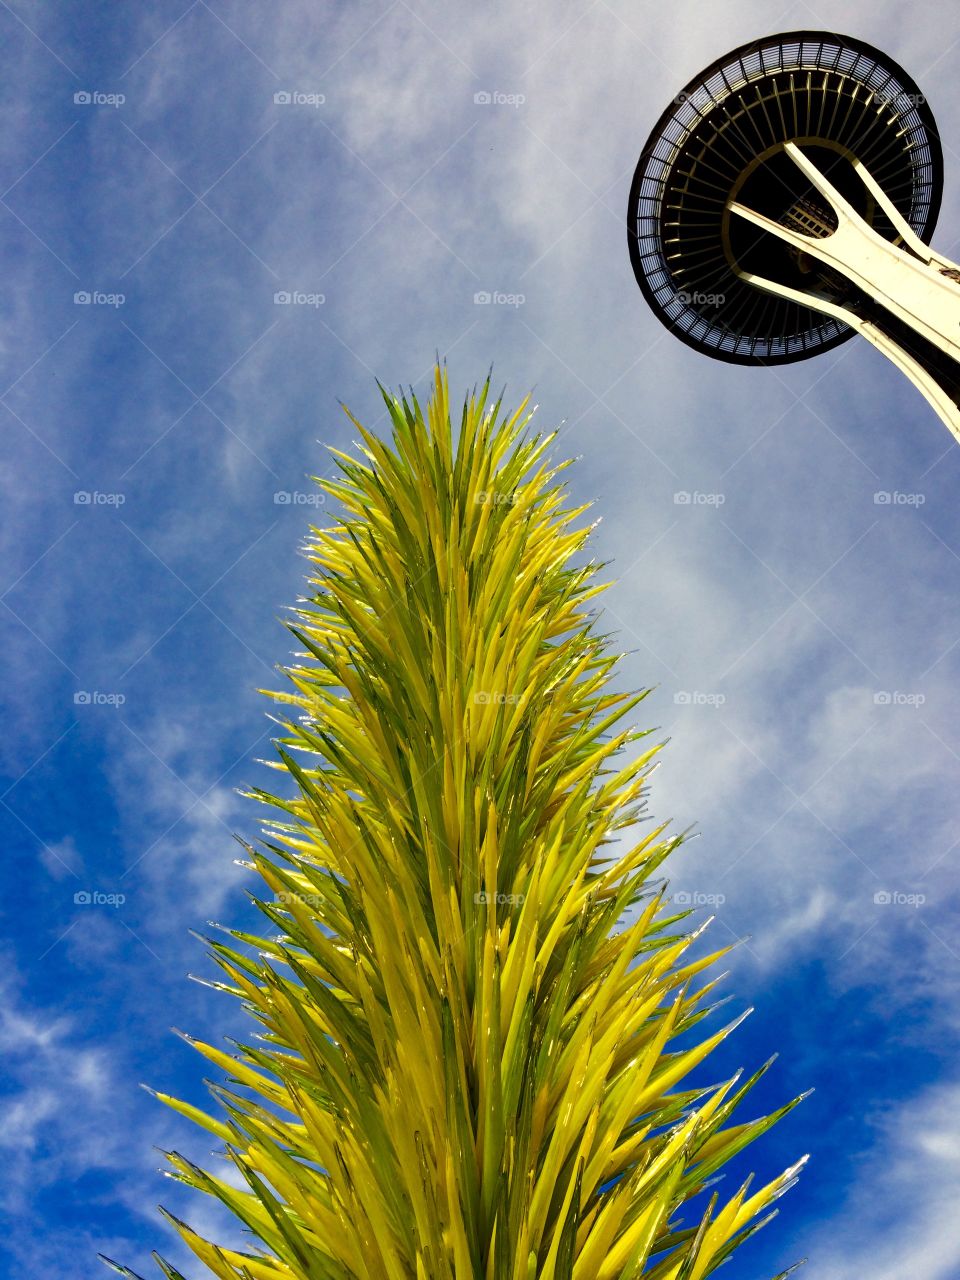 Chihuly Garden & Glass . Glass and the Space Needle as seen from Chihuly Garden & Glass. 